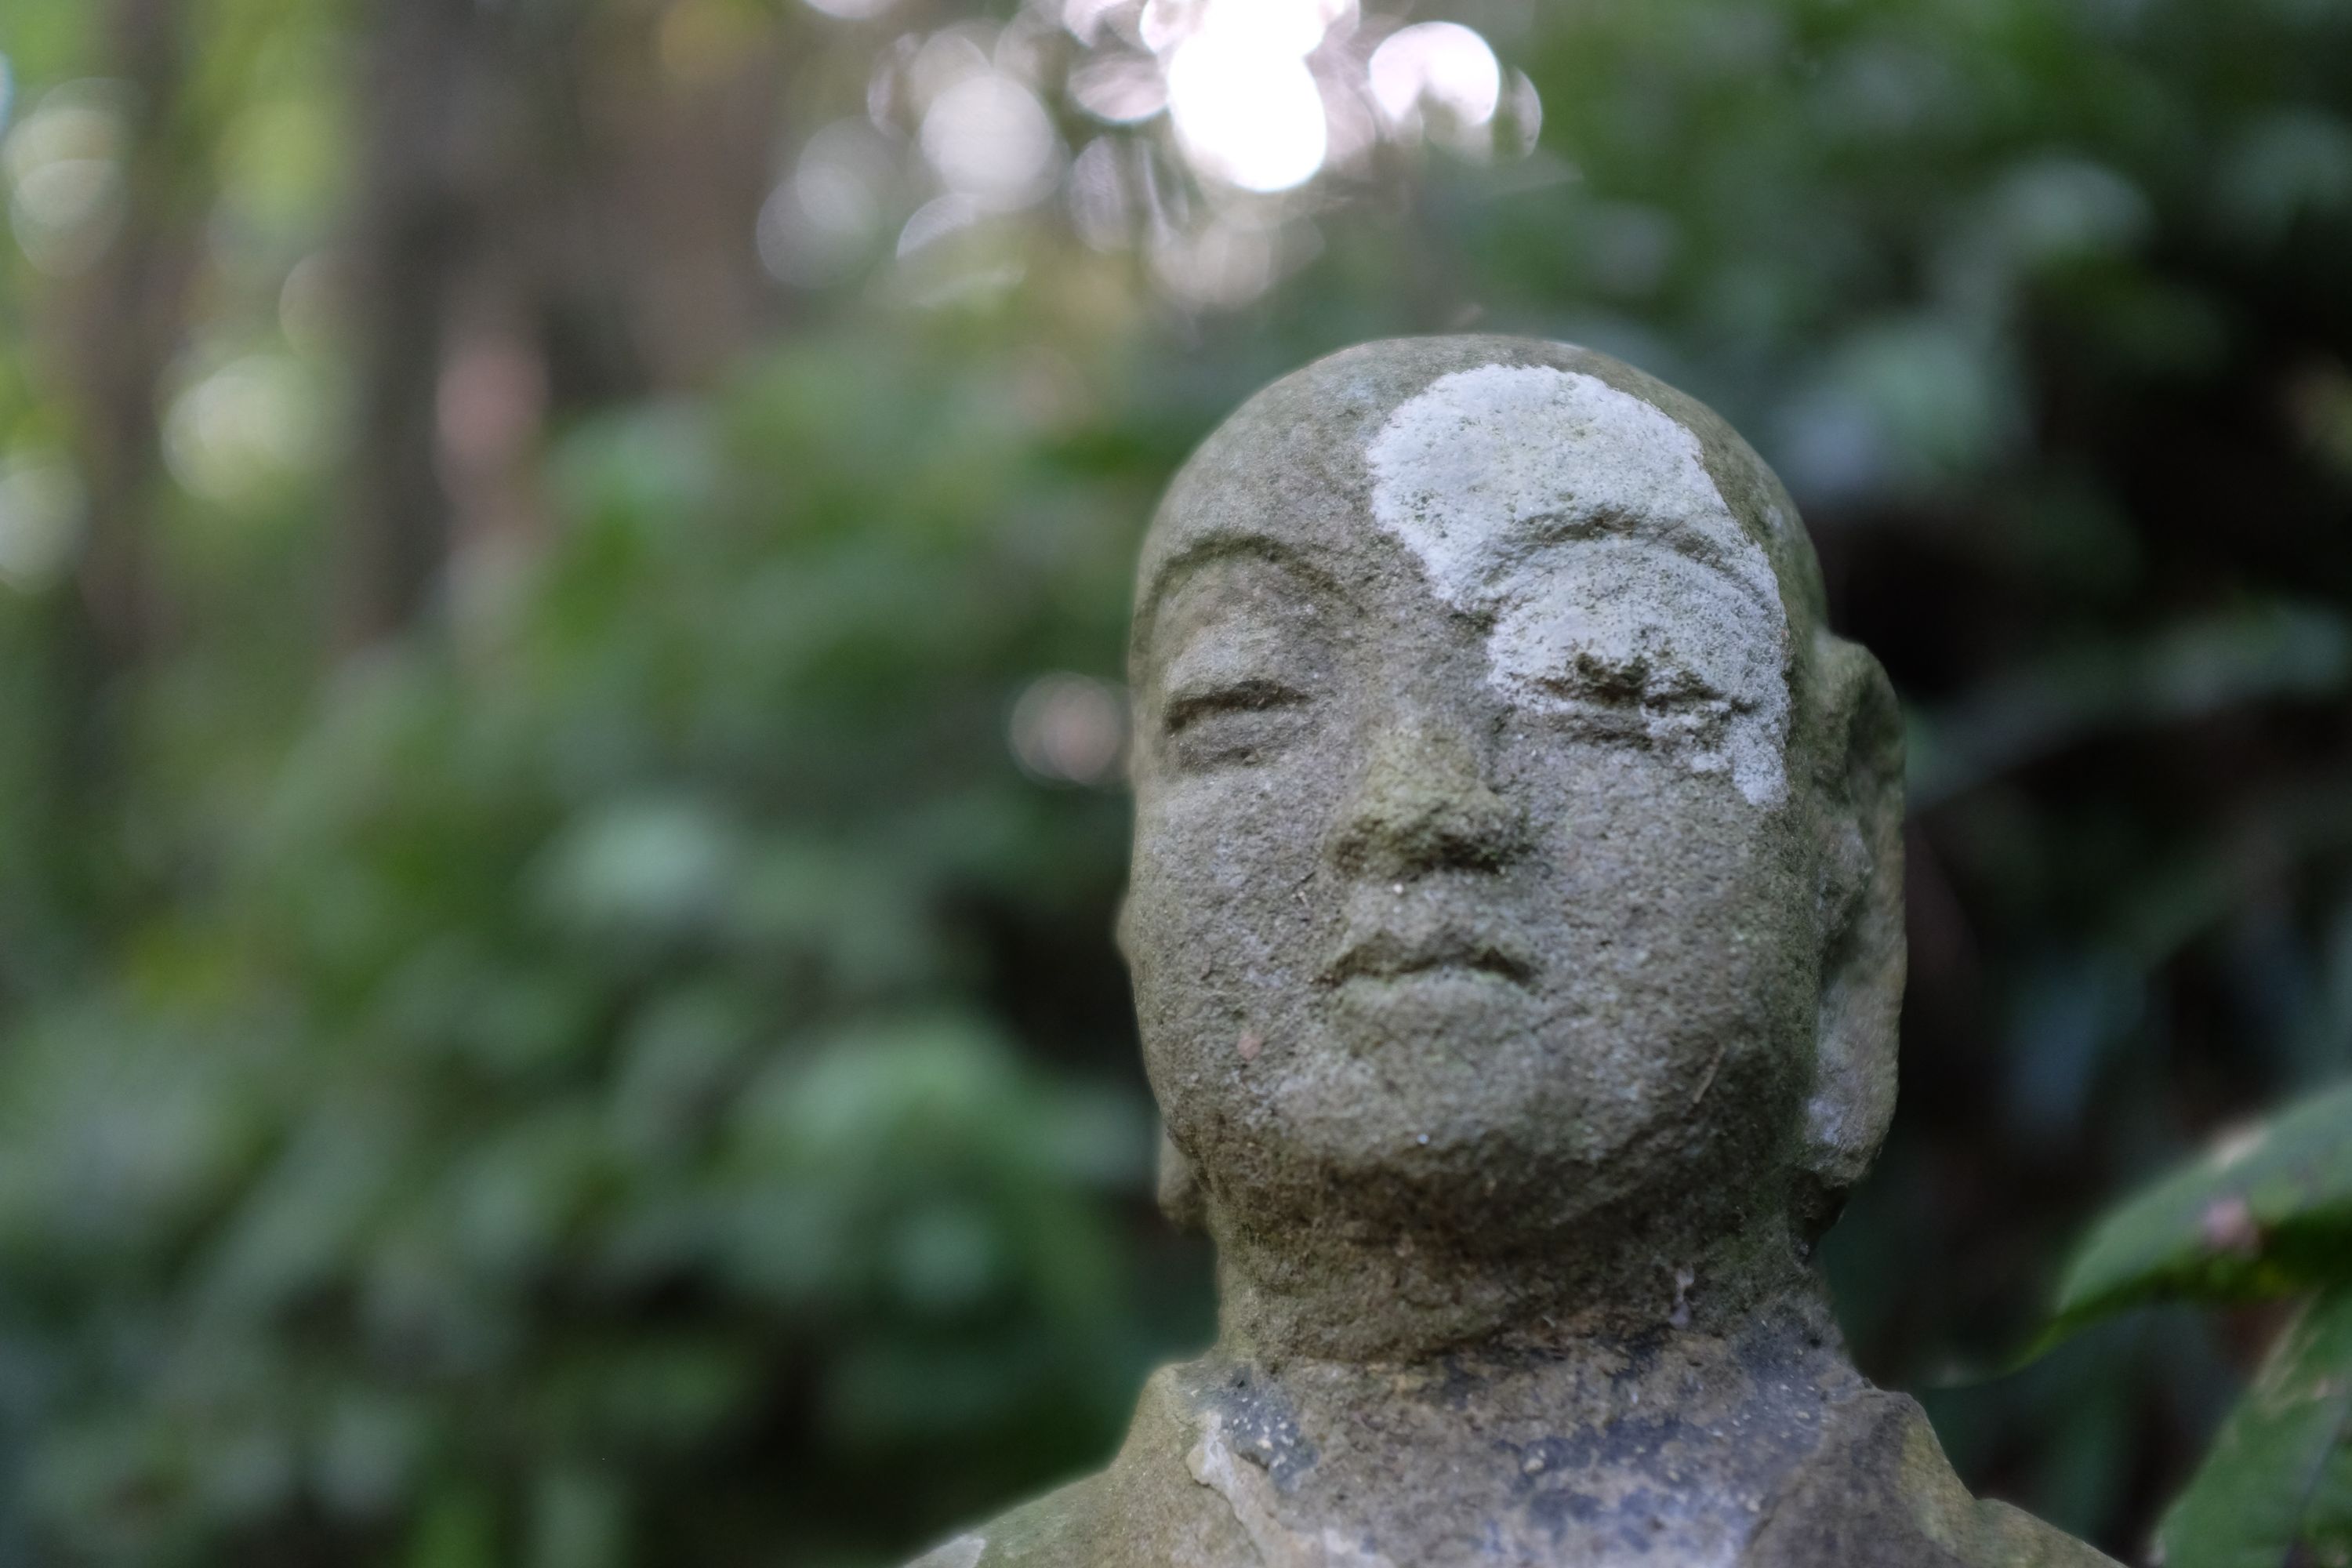 Portrait of a Buddha statue with a growth of lichen across its forehead and left eye.